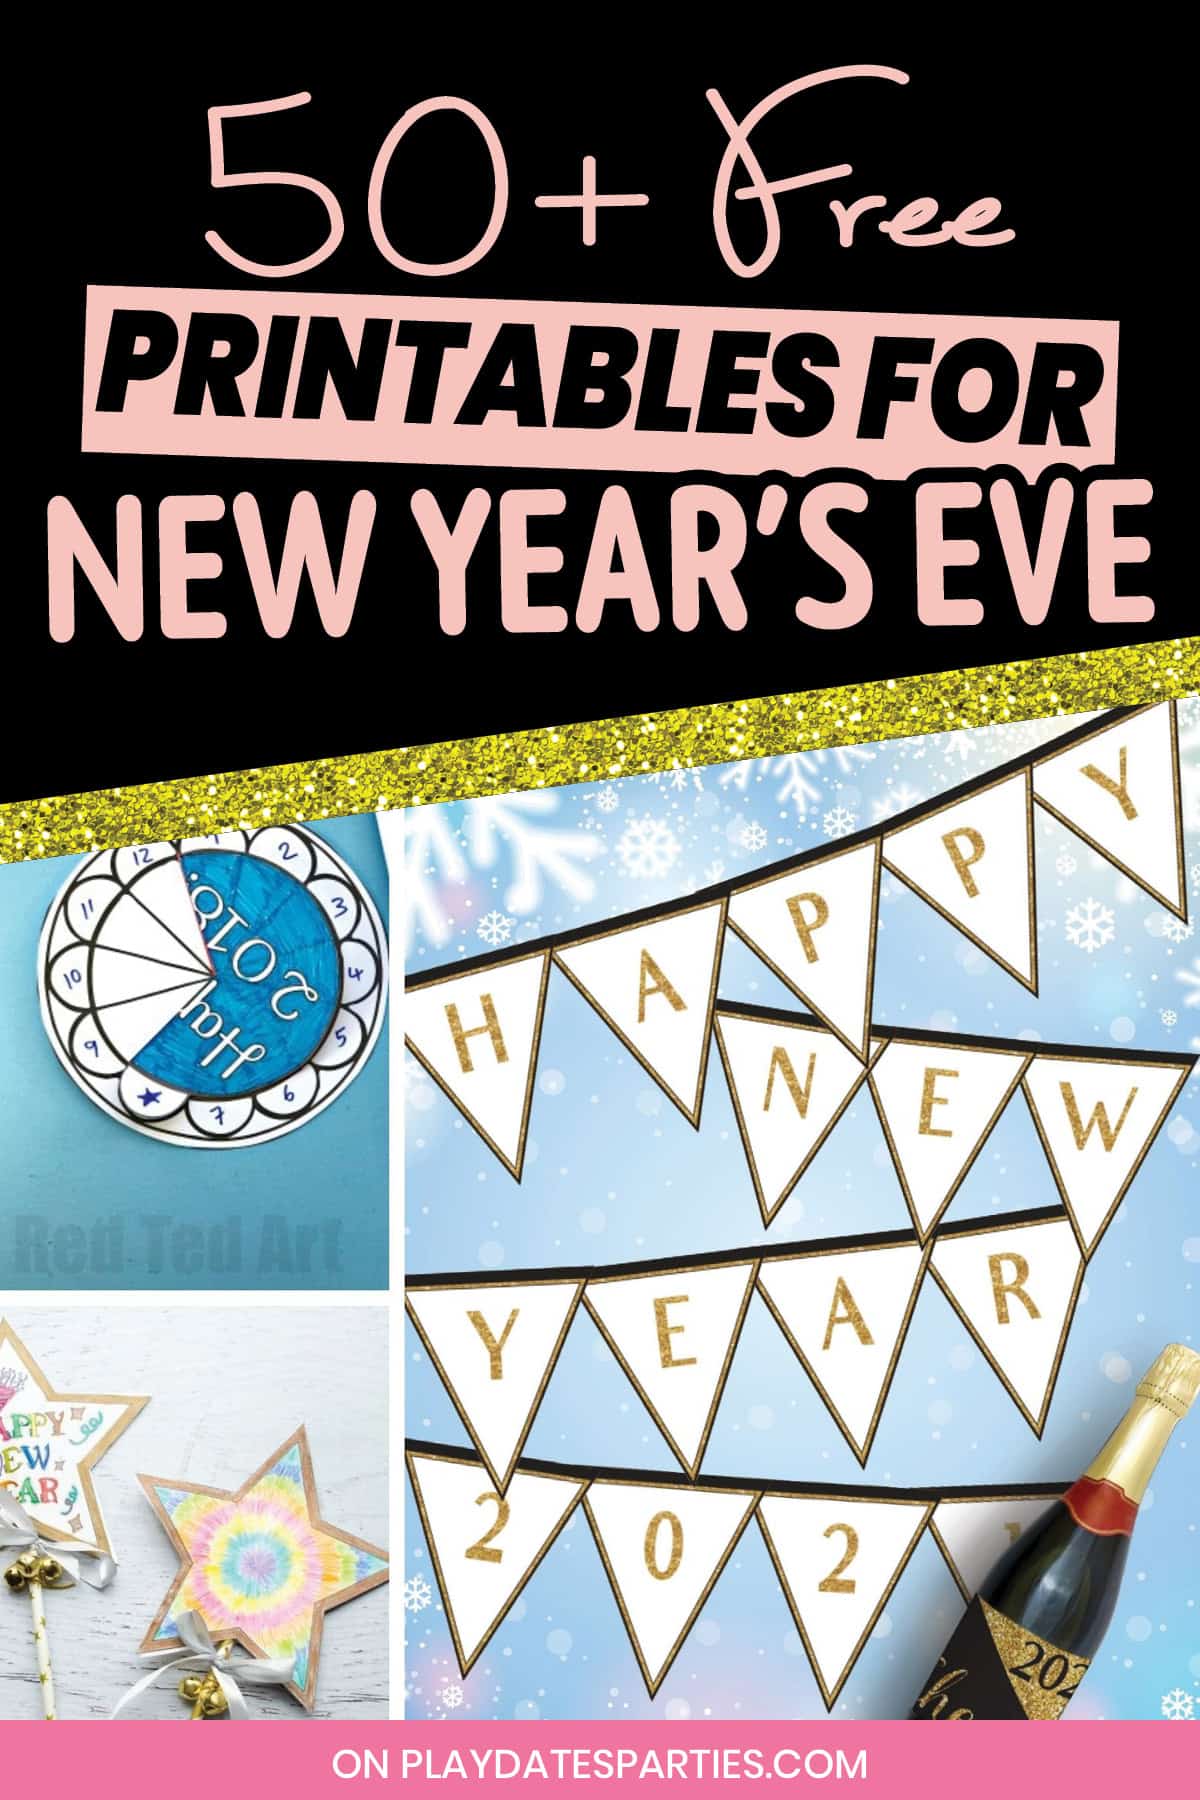 50 Hilariously Fun New Year's Party Games 2021